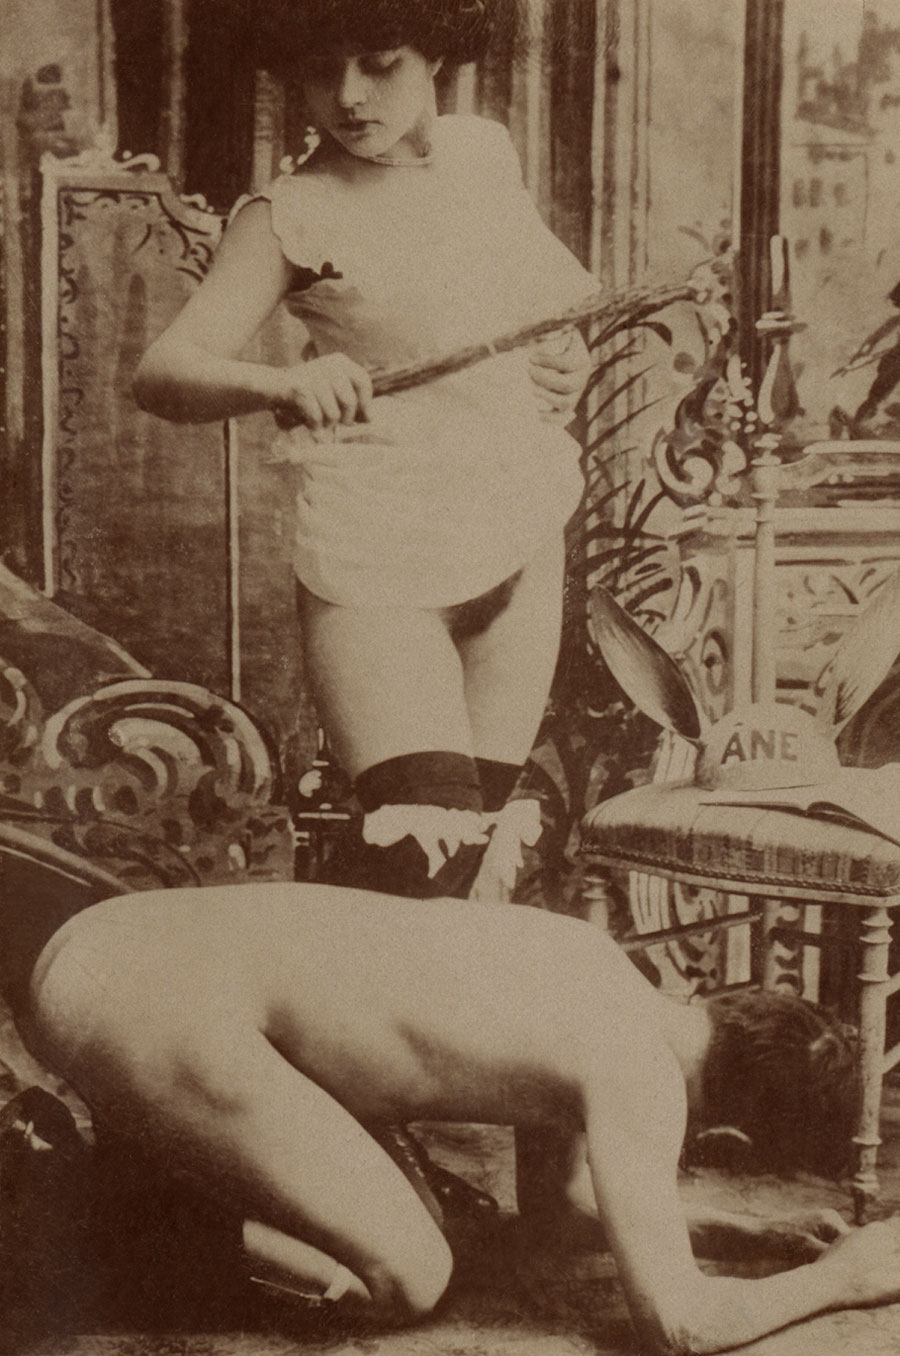 1890s Nudes Porn - Reclining female nude â€“ Art Blart _ art and cultural memory archive